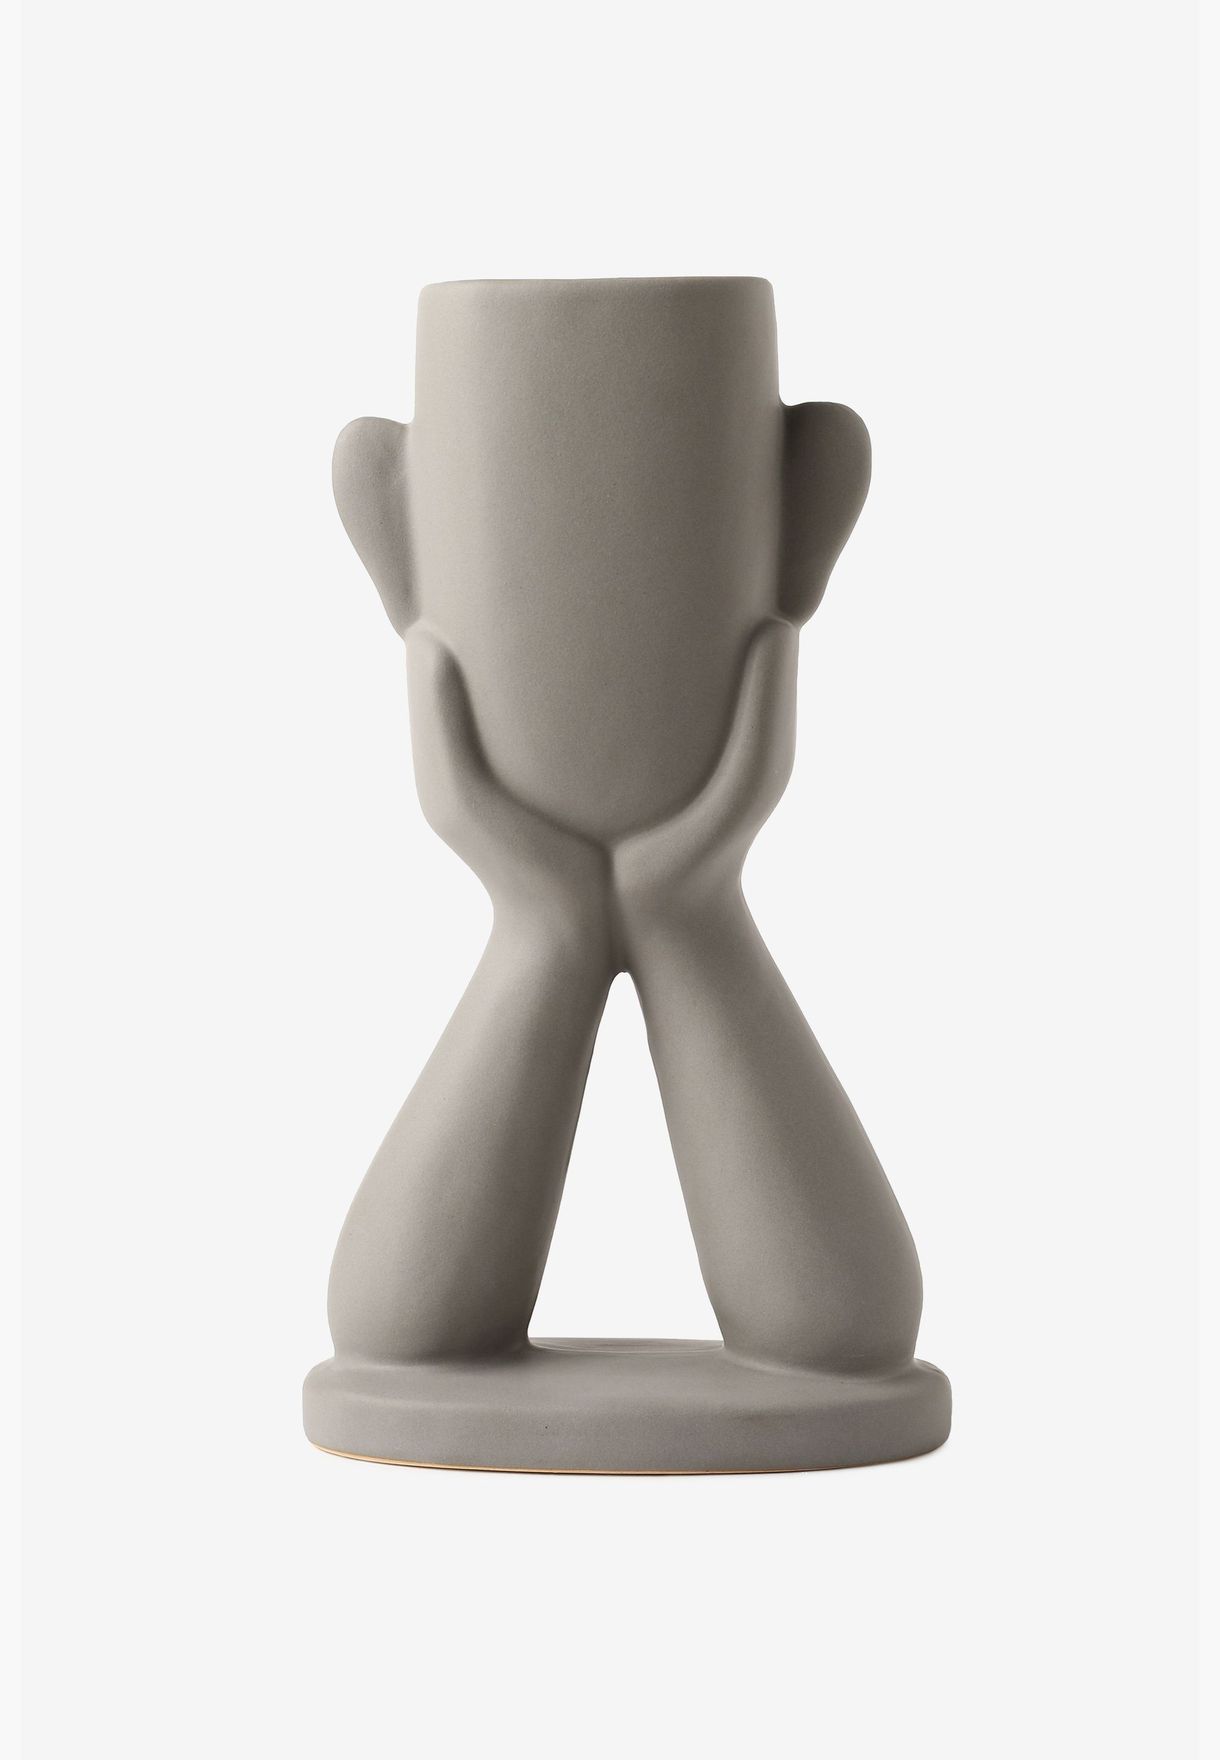 Modern Pewter Face With Hands Figurine Solid Minimalistic Ceramic Showpiece 